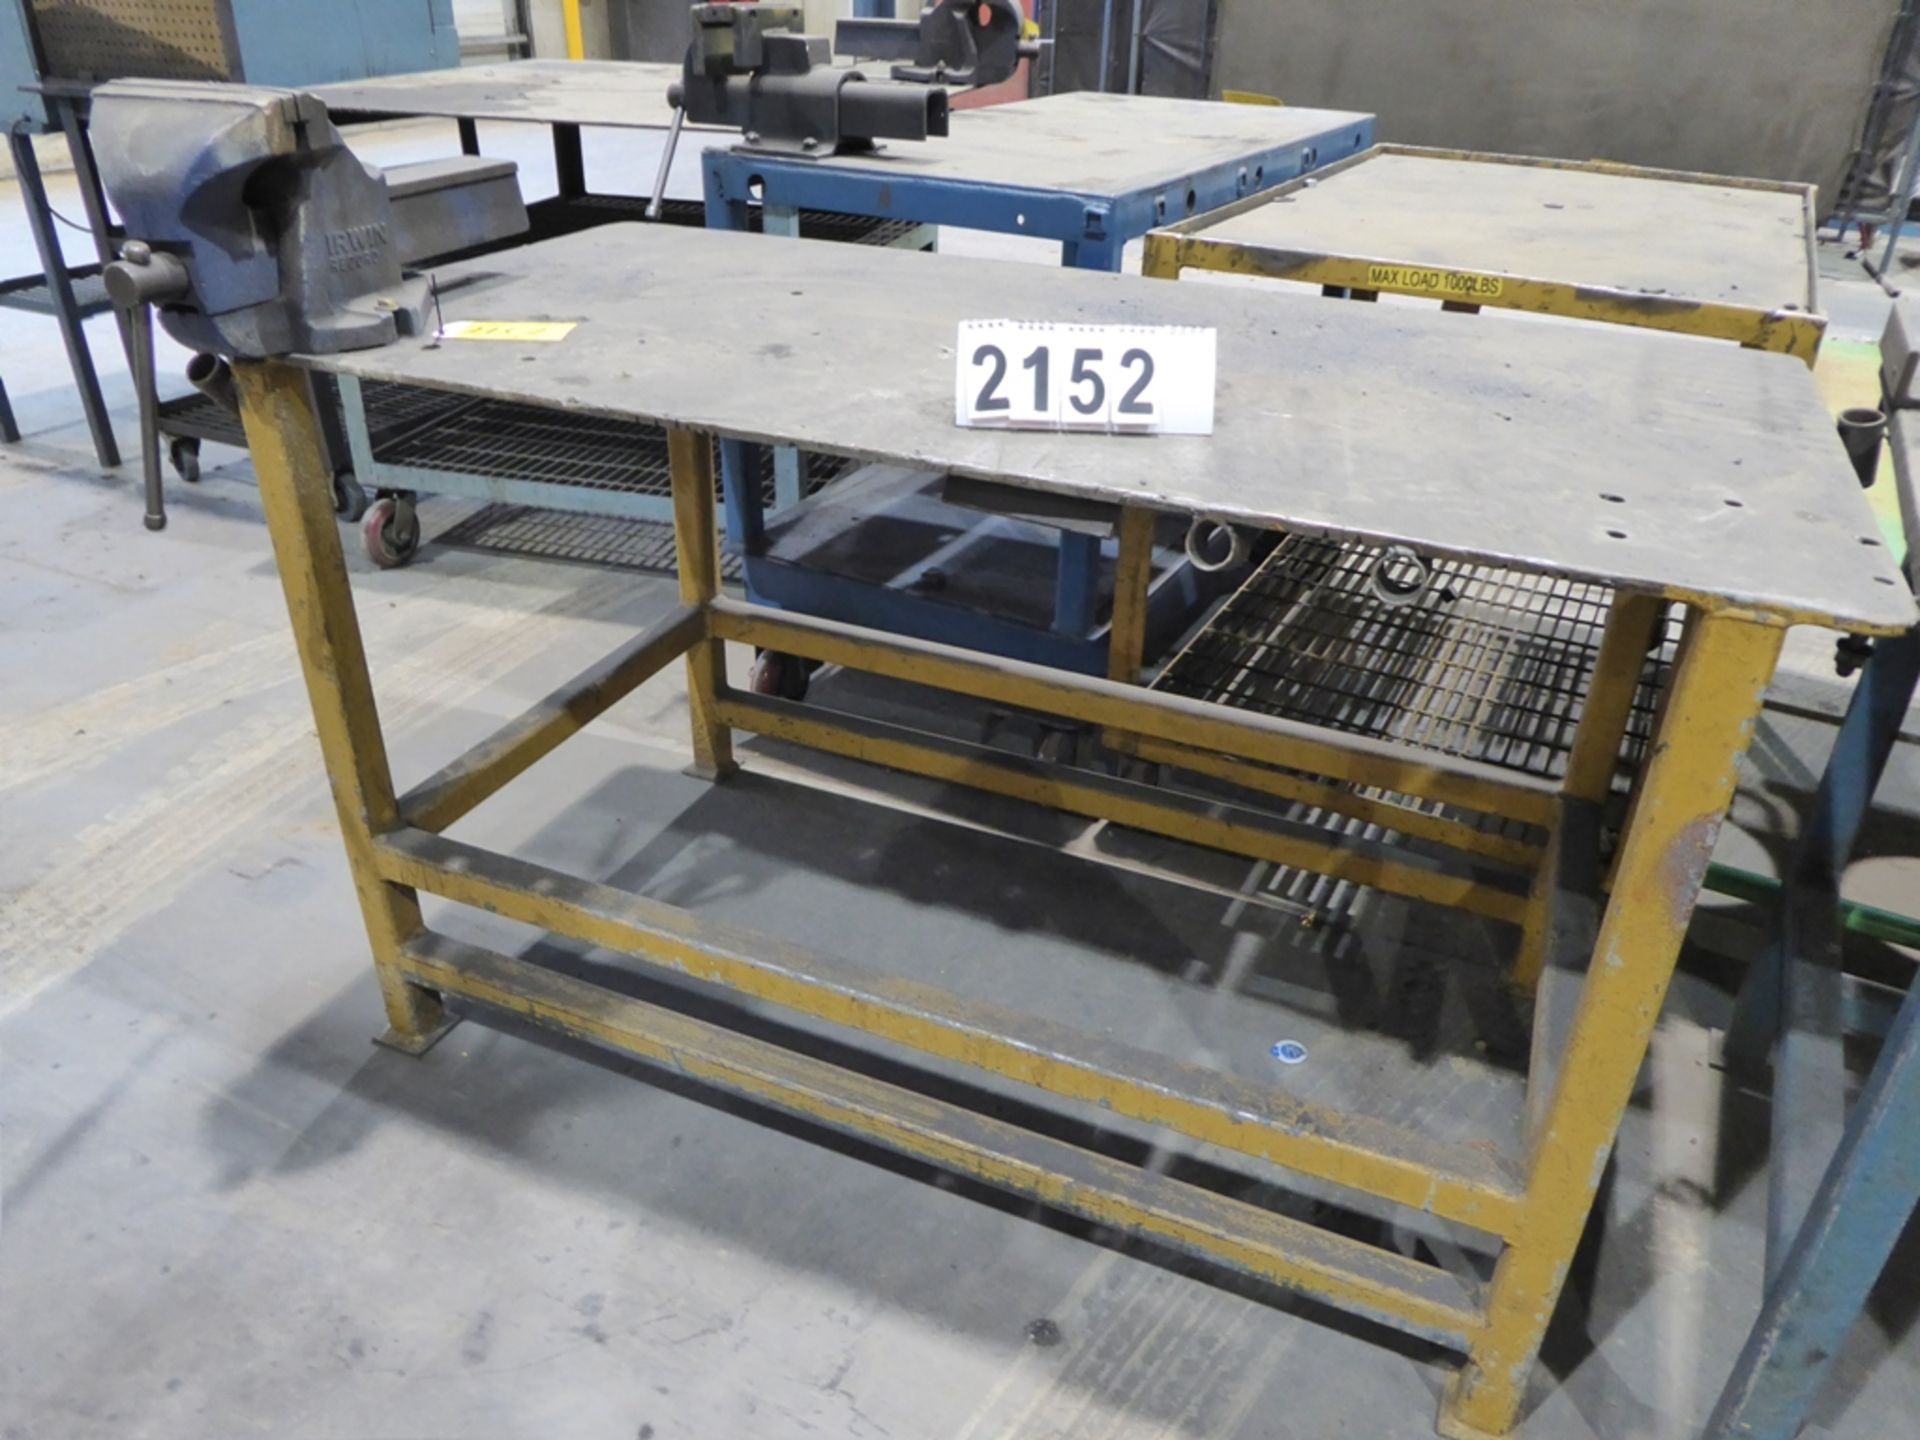 30"X60" STEEL WELDING TABLE W/ RECORD 8" BENCH VISE